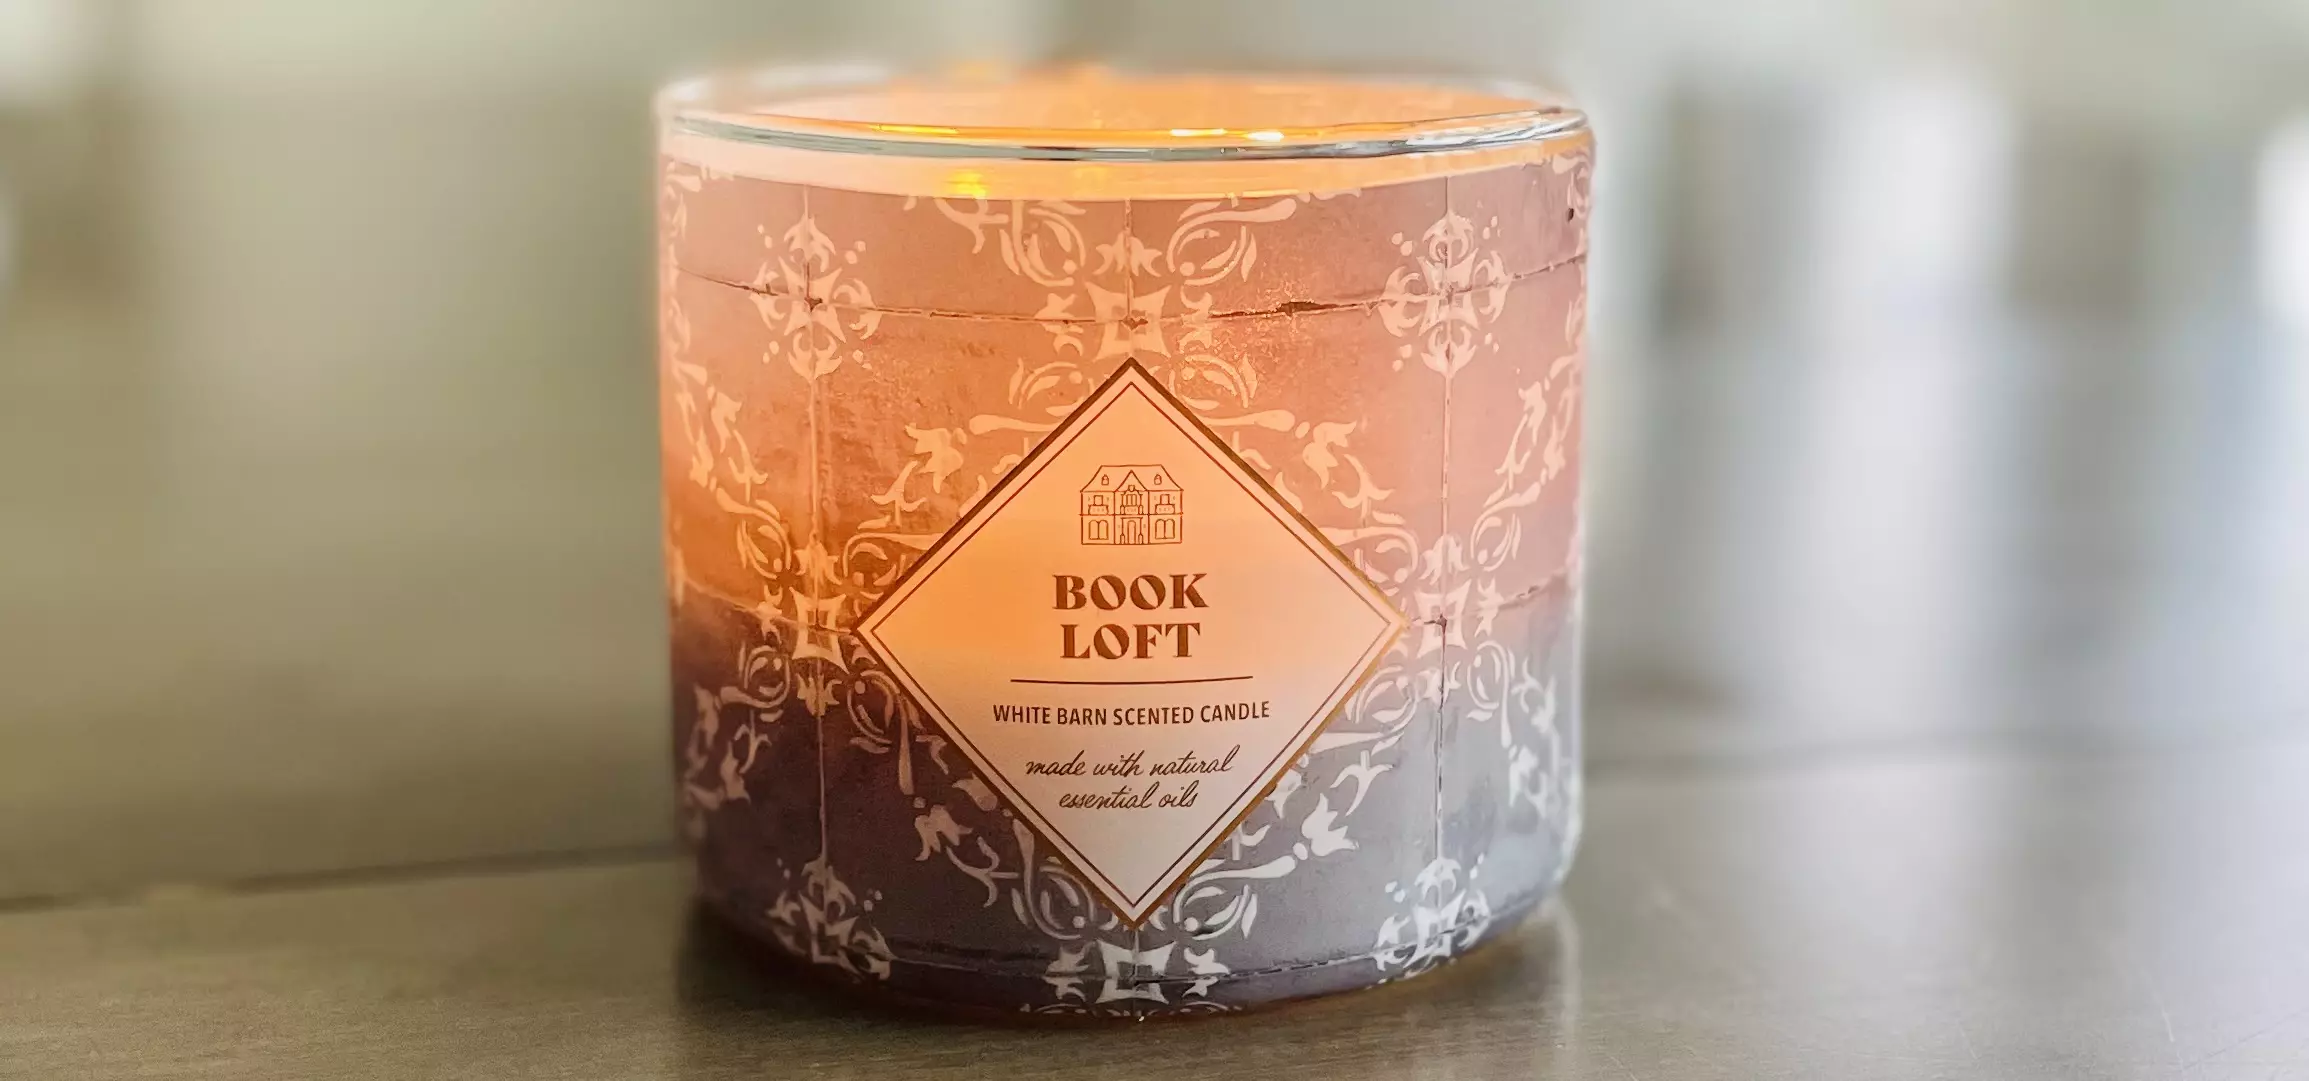 Notes In Book Loft Candle From White Barn / Bath and Body Works